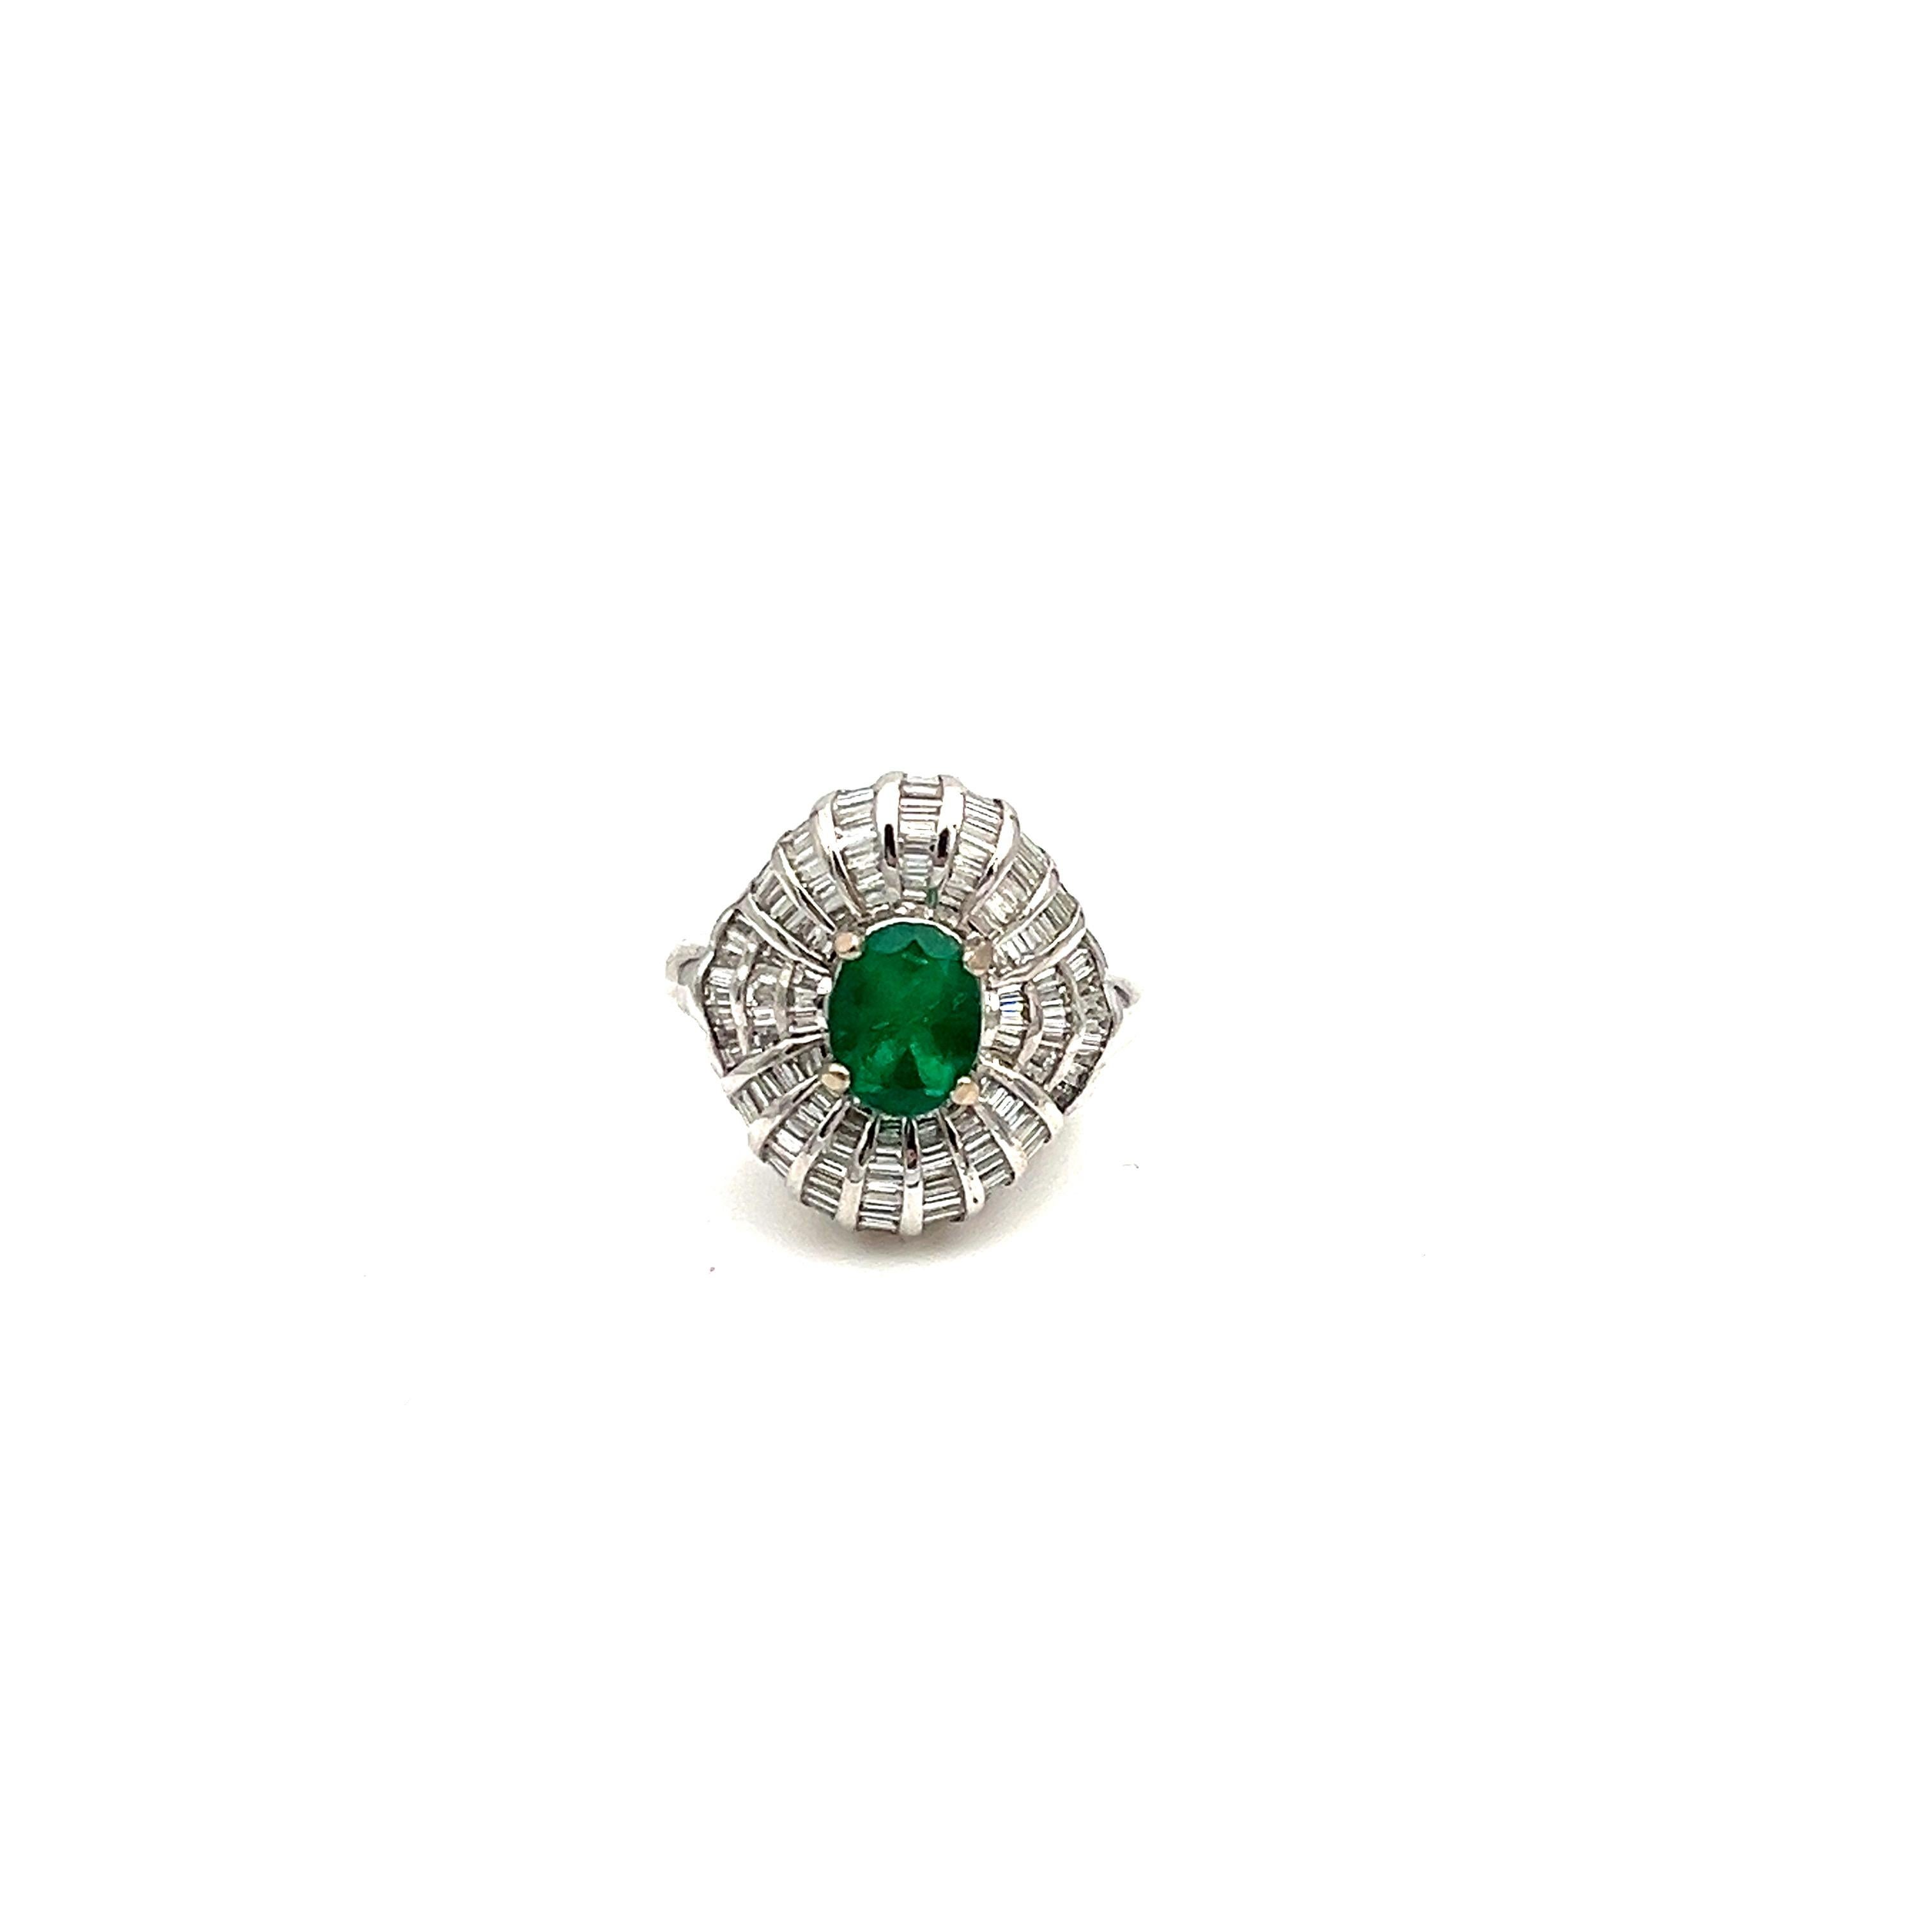 Elevate your jewelry collection with this stunning 18k white gold cocktail ring featuring a natural 1.37 ct oval-shaped emerald and sparkling diamond accents. The gemstone is set in a beautifully designed white gold band, making it an exquisite